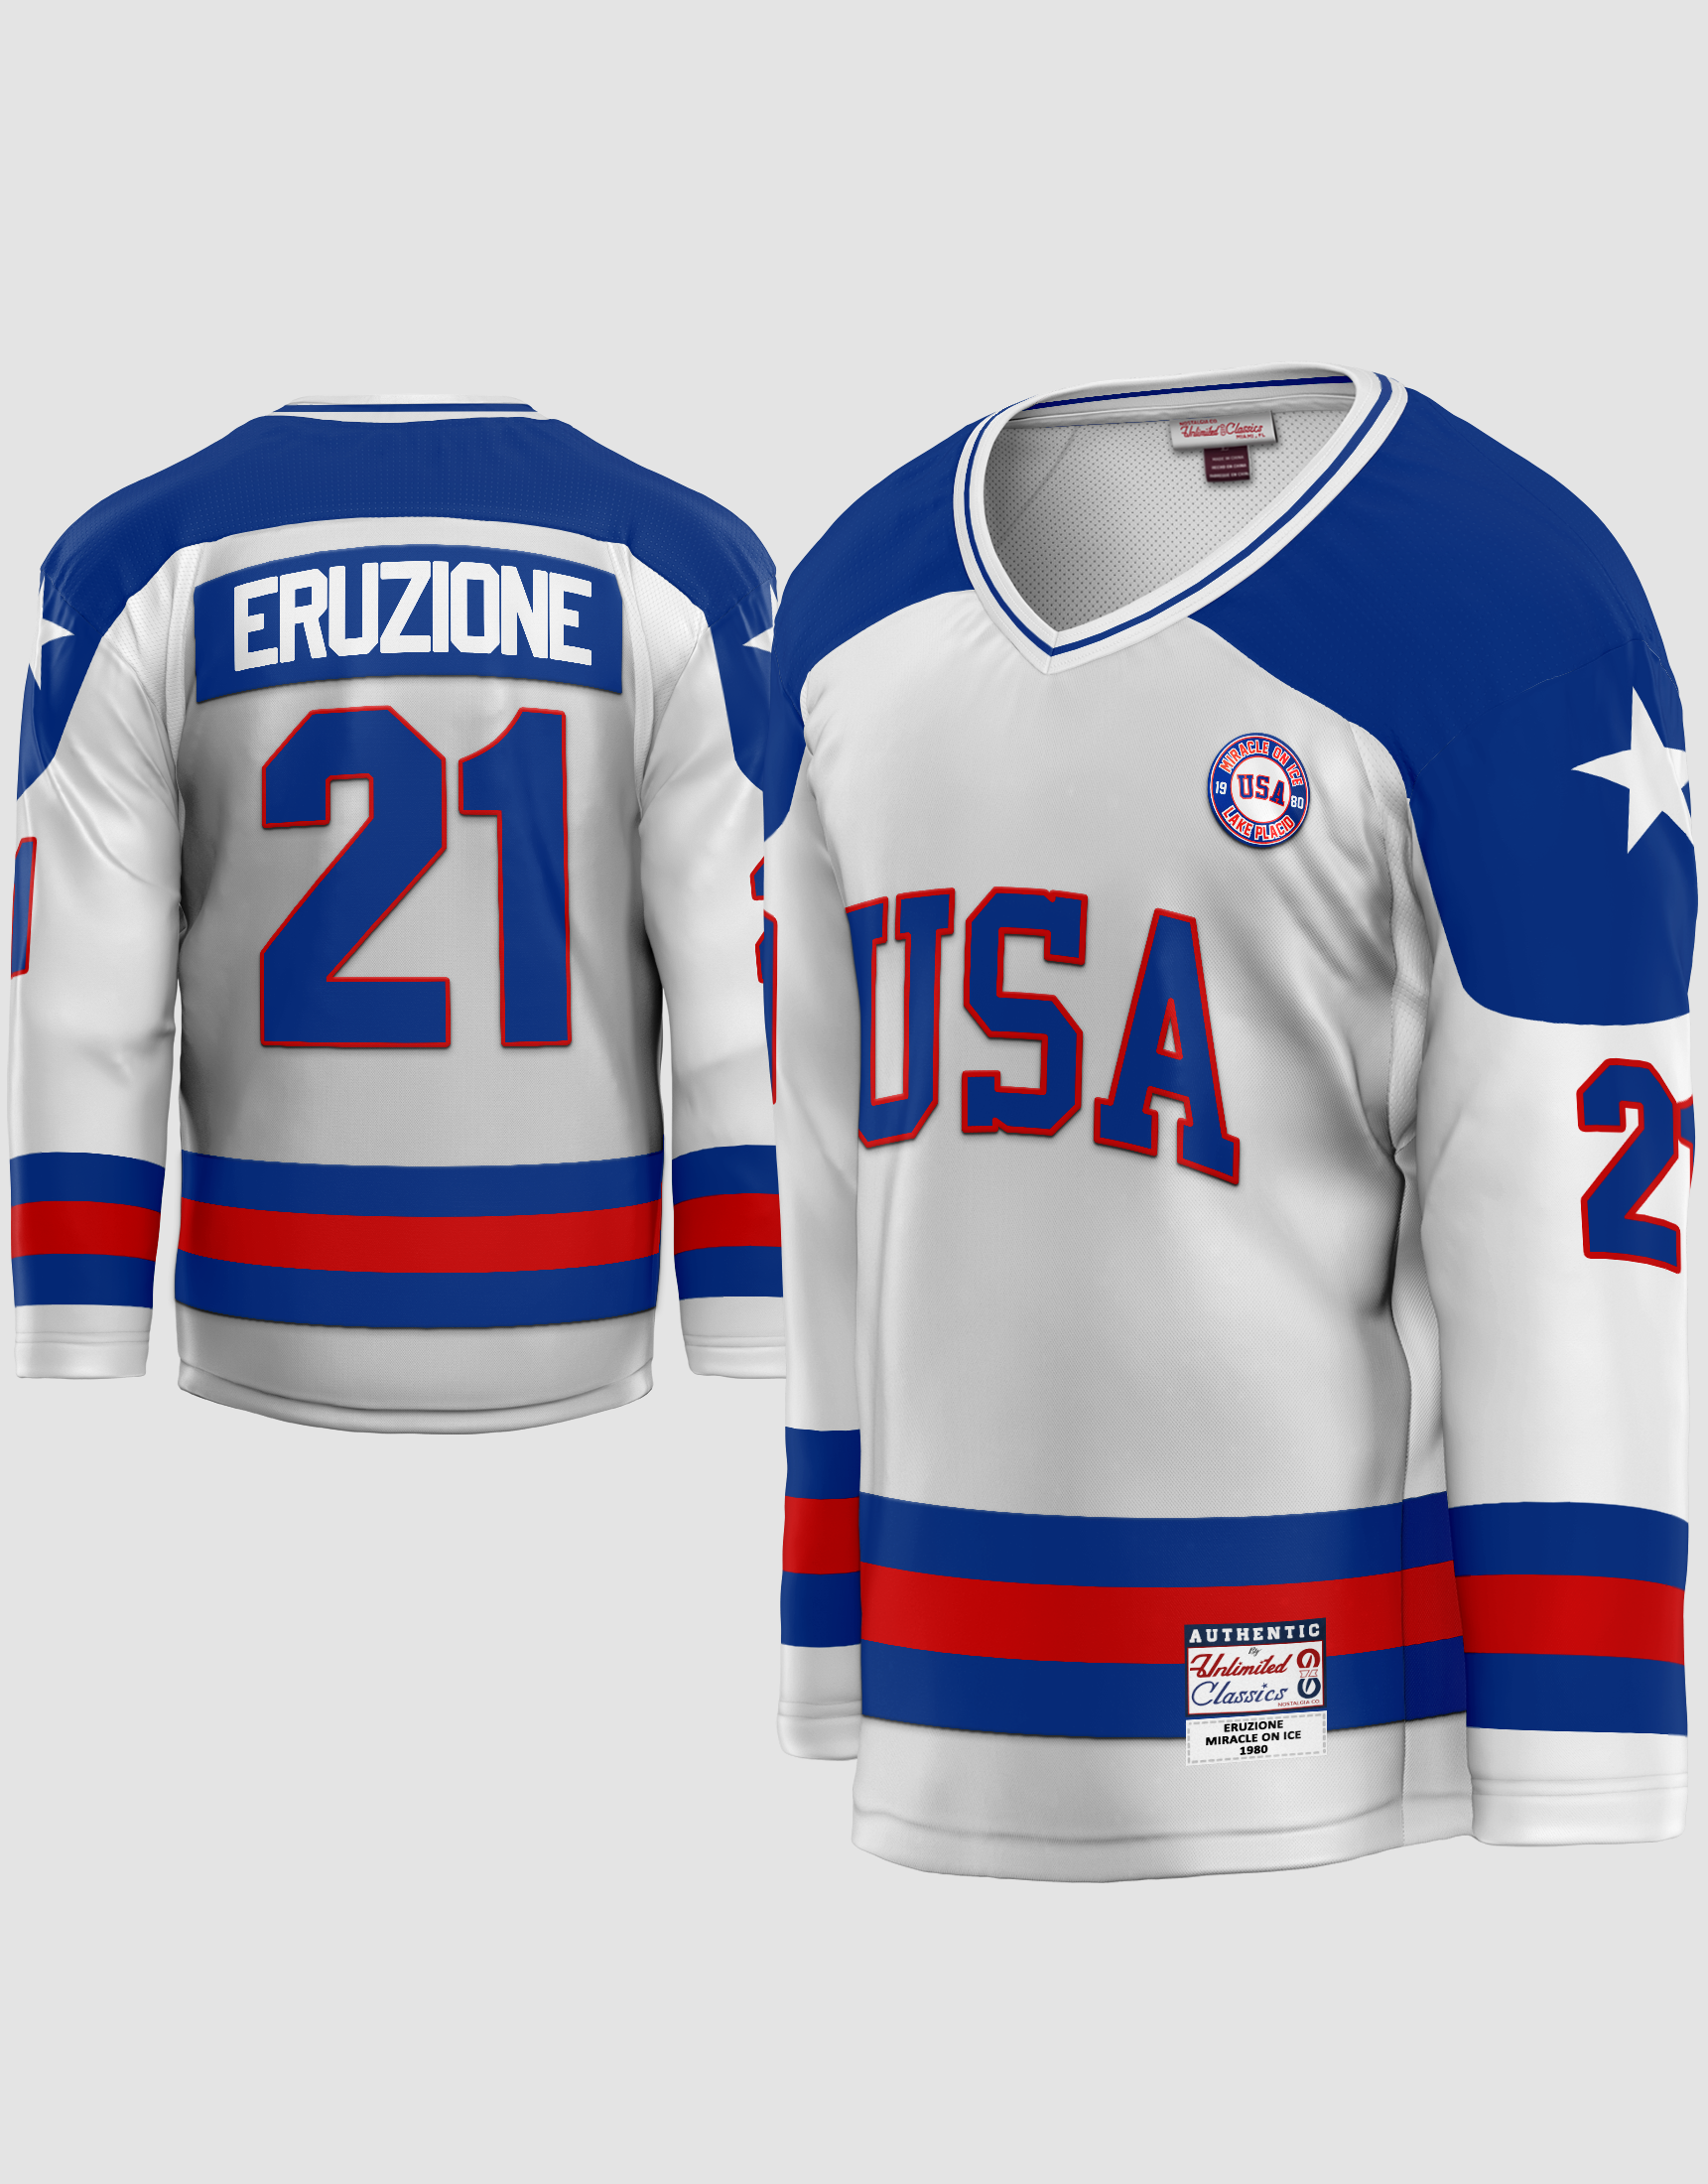 Your Team Eruzione #21 USA 1980 Miracle on Ice Men's Movie Hockey Jersey Stitched Sweatershirt White XL